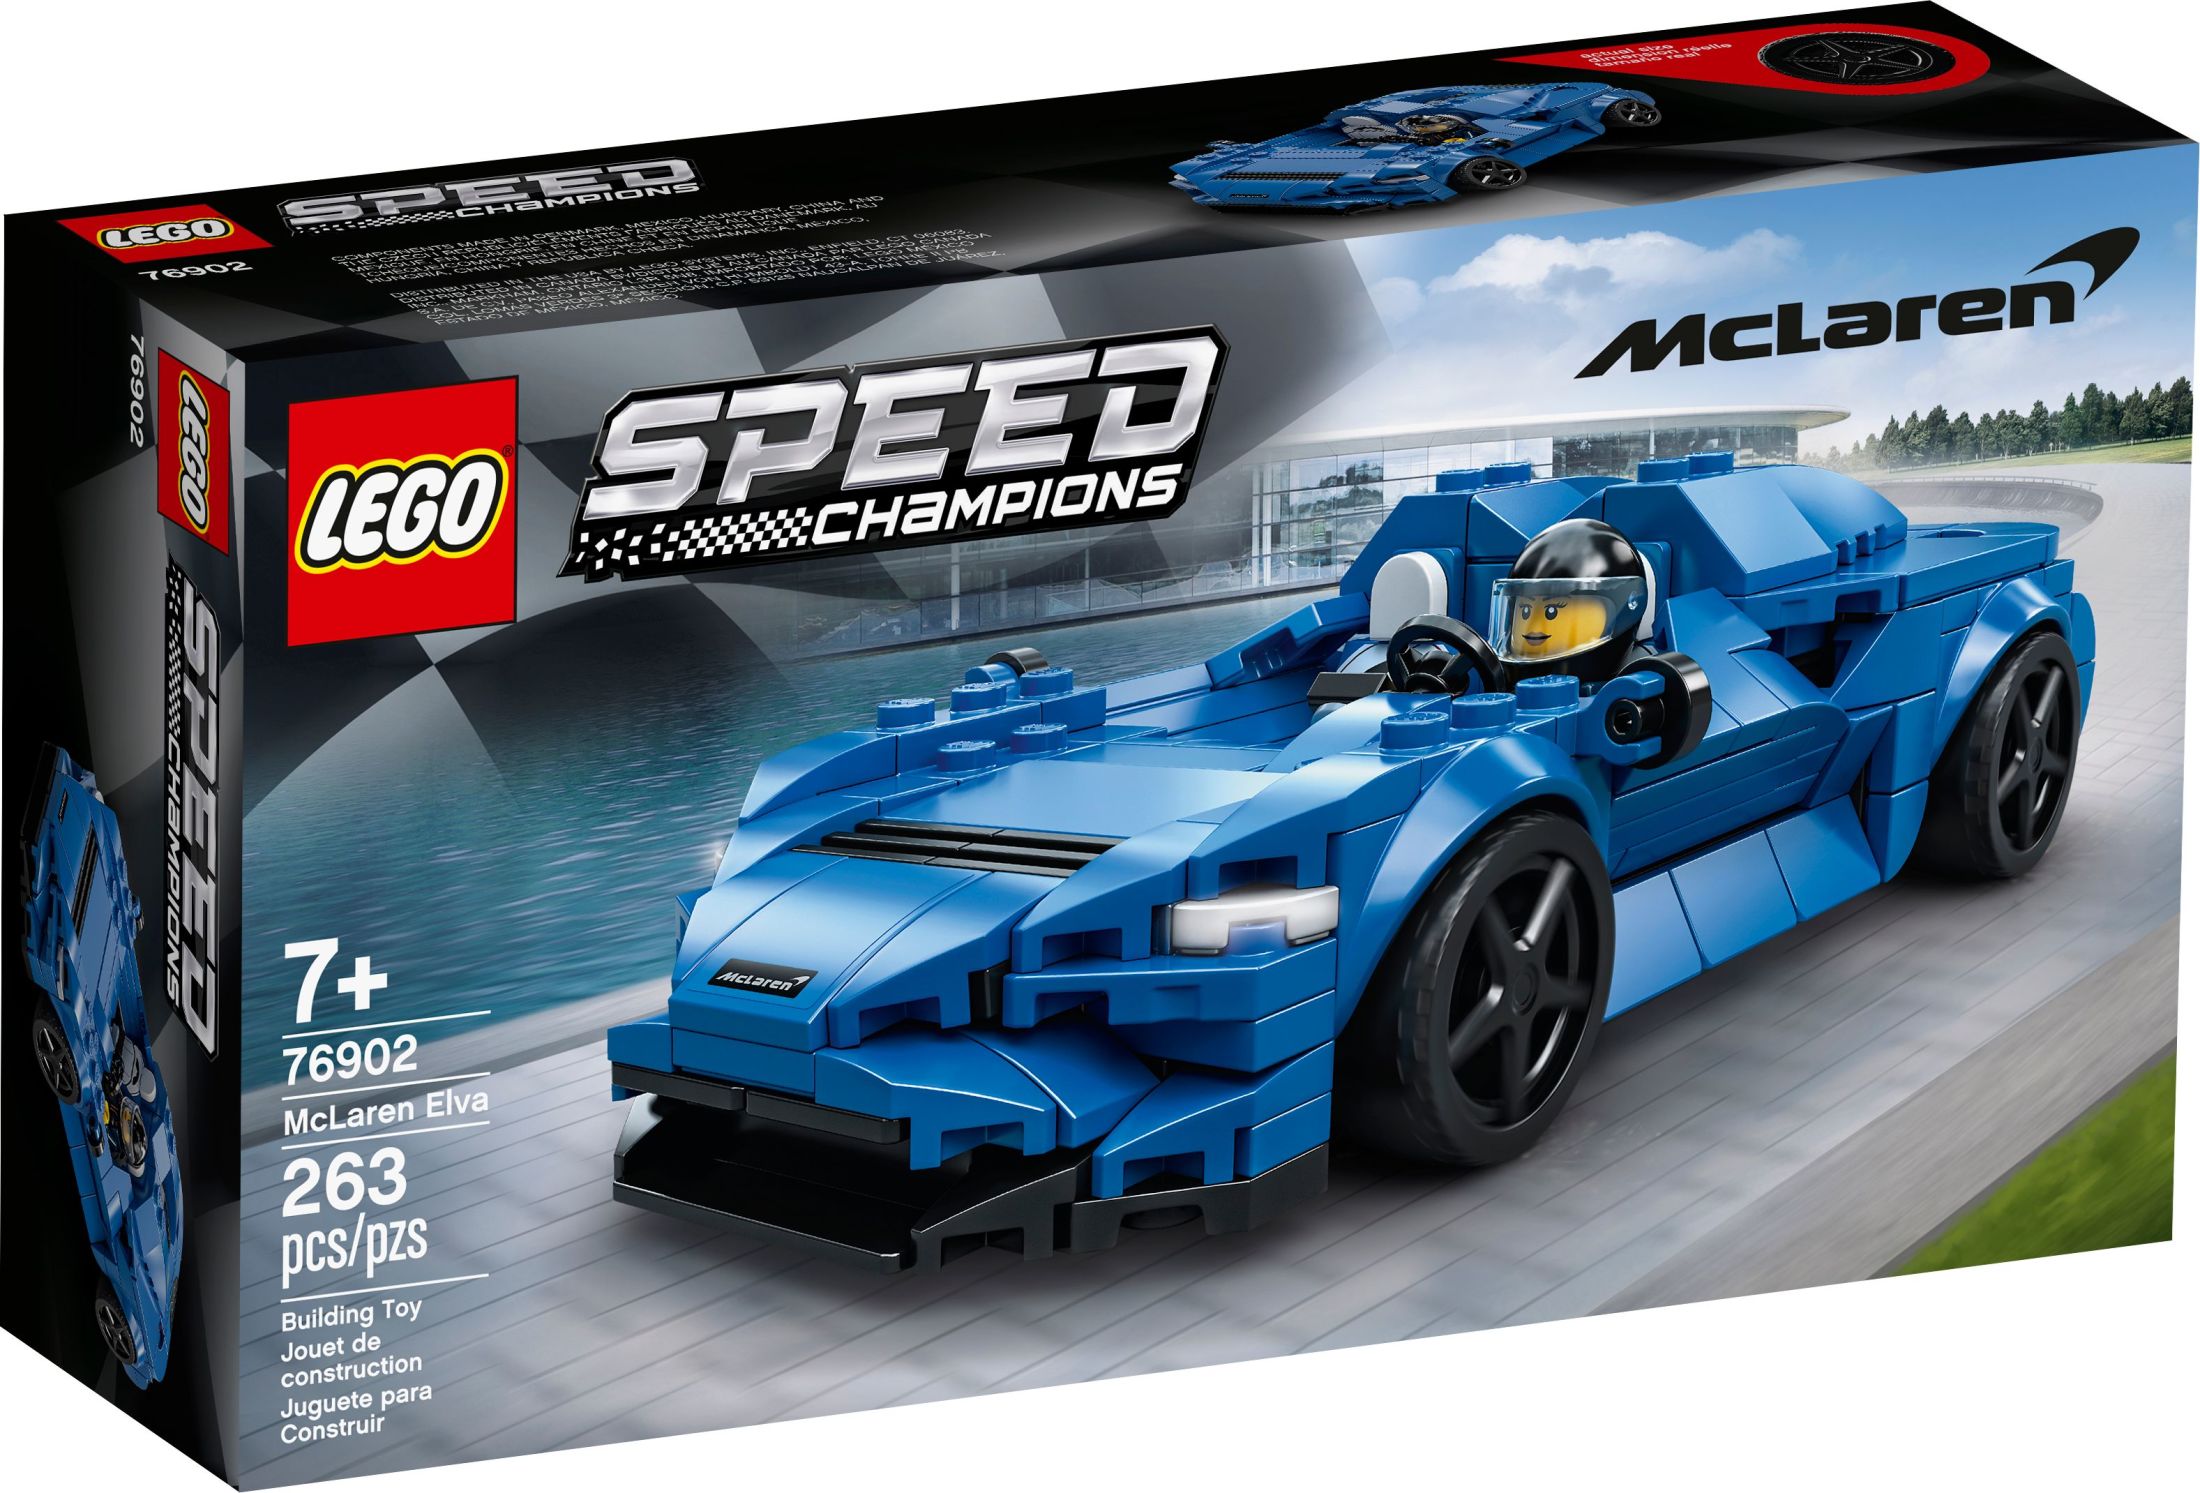 LEGO Speed Champions McLaren Elva 76902 Buildable Toy Car for Kids (263 Pieces) - image 3 of 8